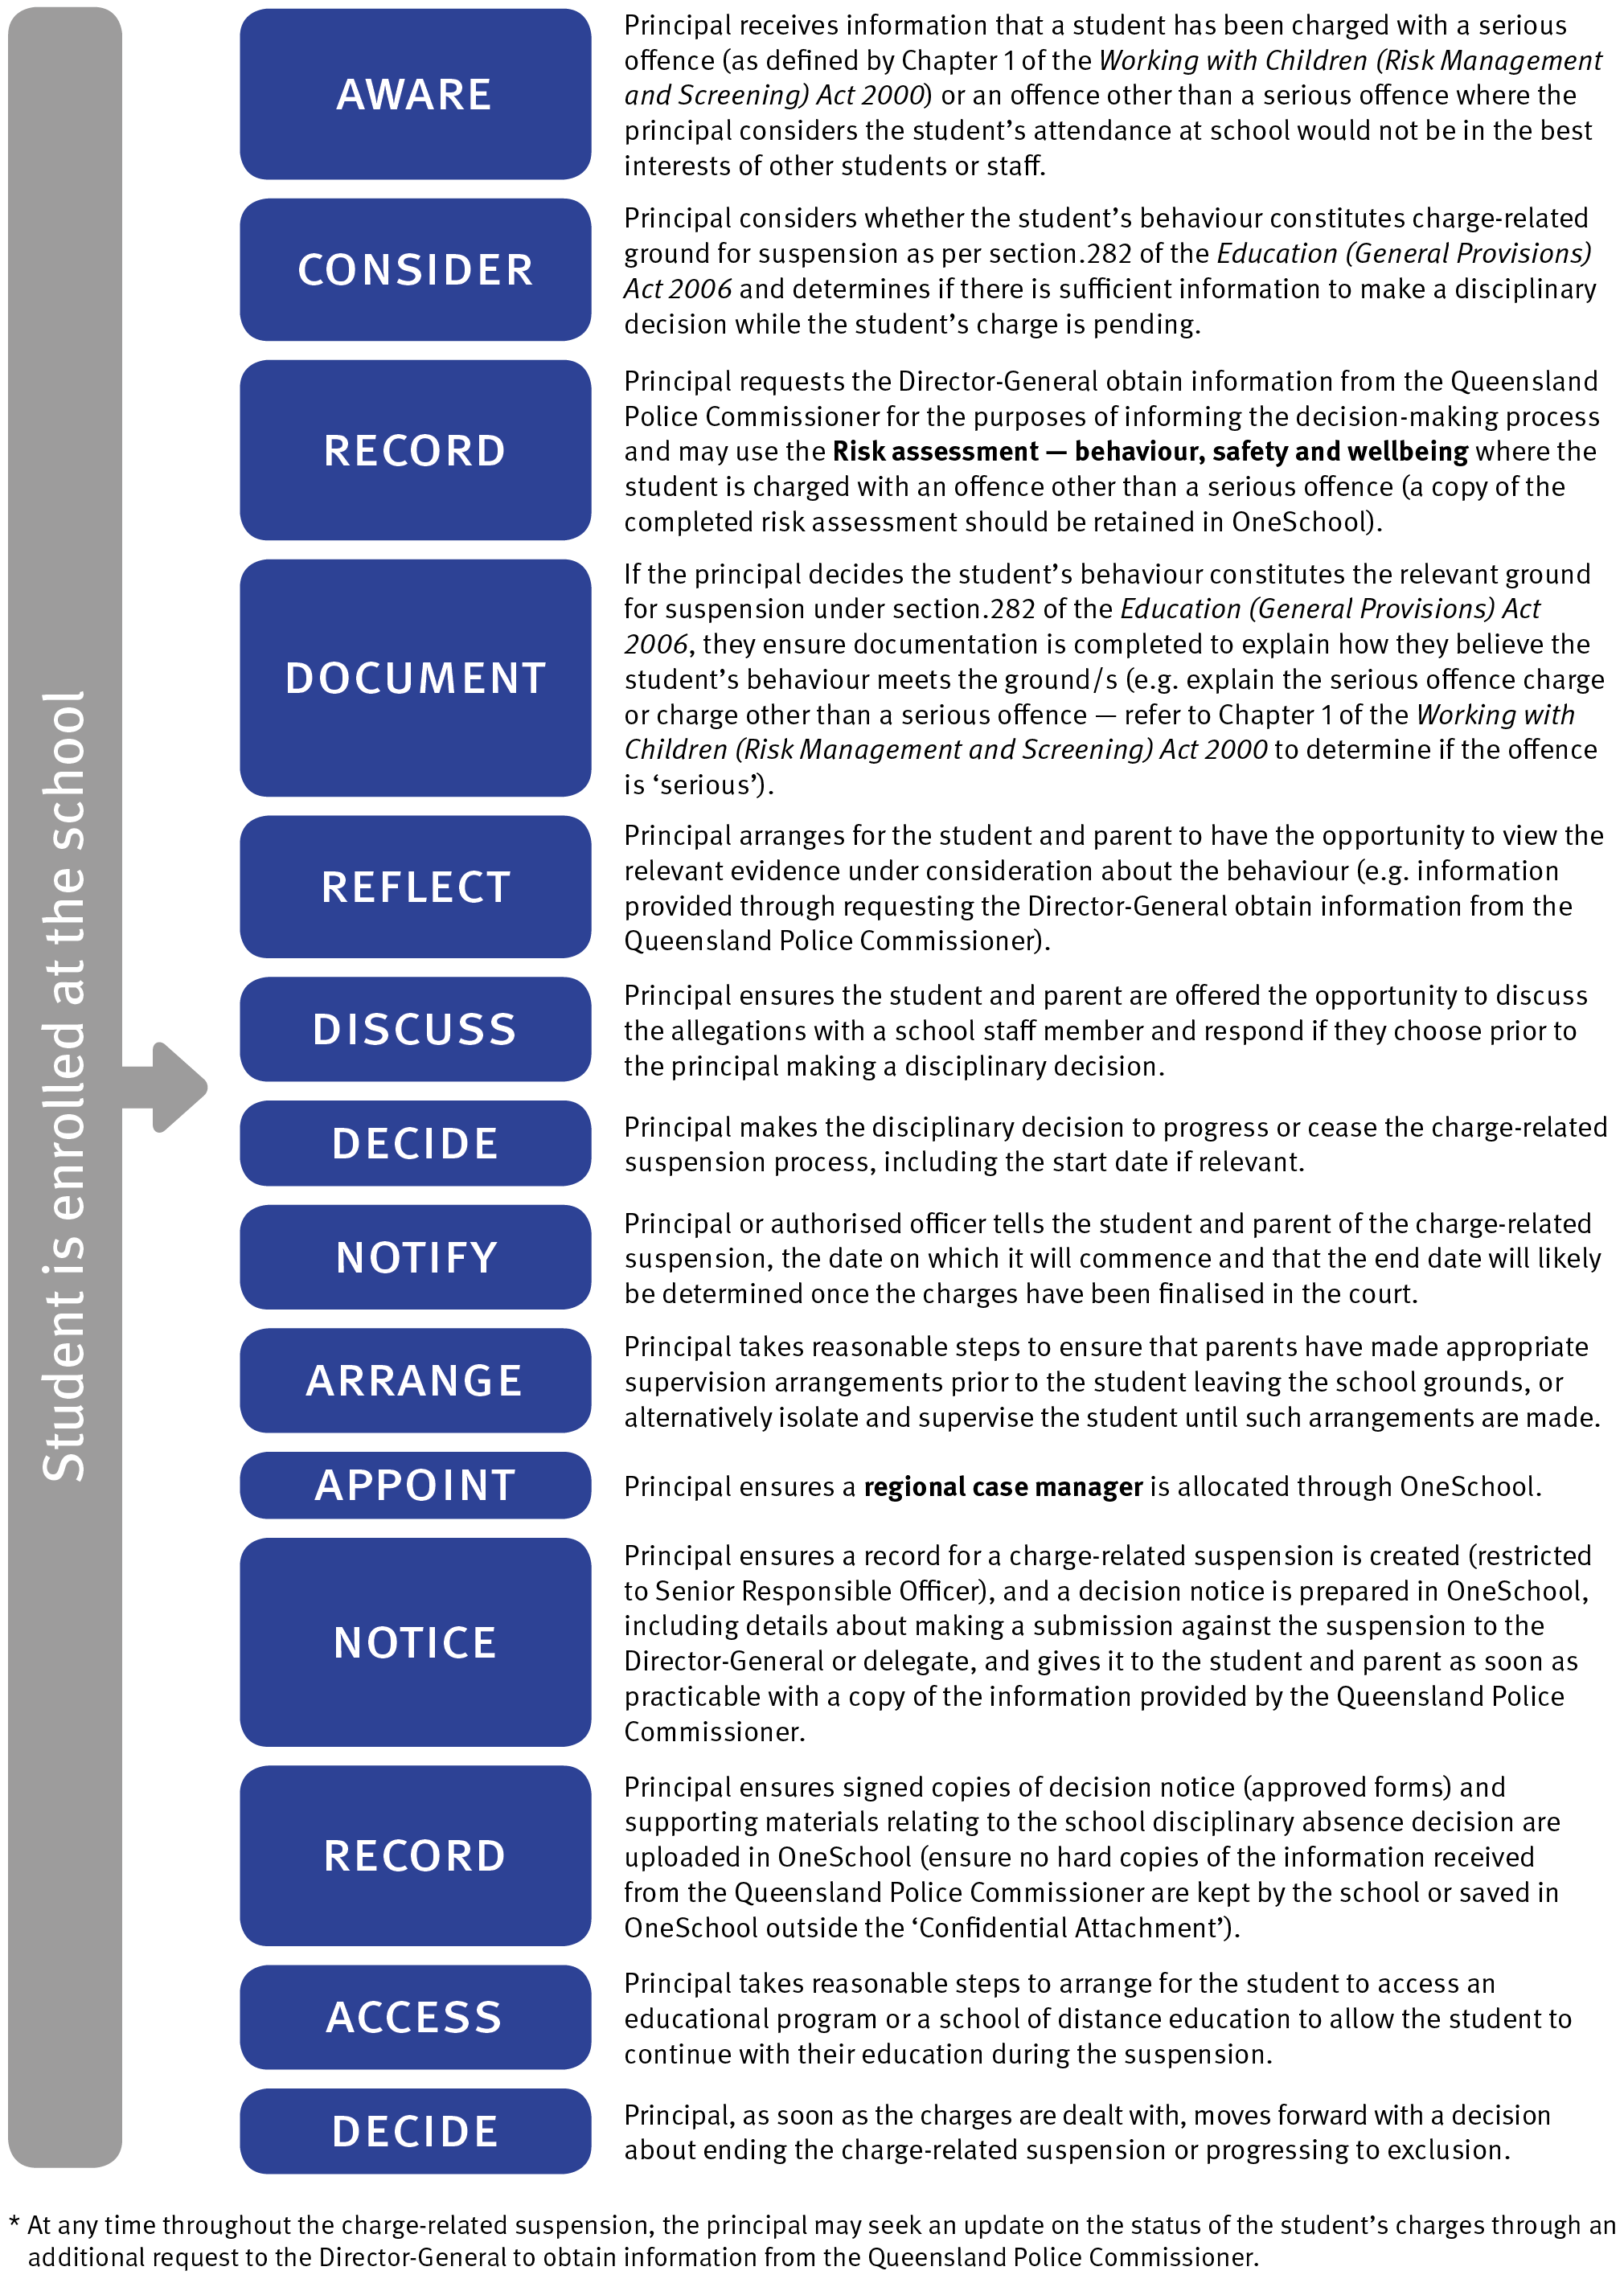 Flowchart showing steps for Principal to process charge related suspensions where a student is enrolled at the school as: 1. Aware  2. Consider 3. Record 4. Document 5. Reflect 6. Discuss 7. Decide 8. Notify 9. Arrange 10. Appoint 11. Notice 12. Record 13. Access 14. Decide